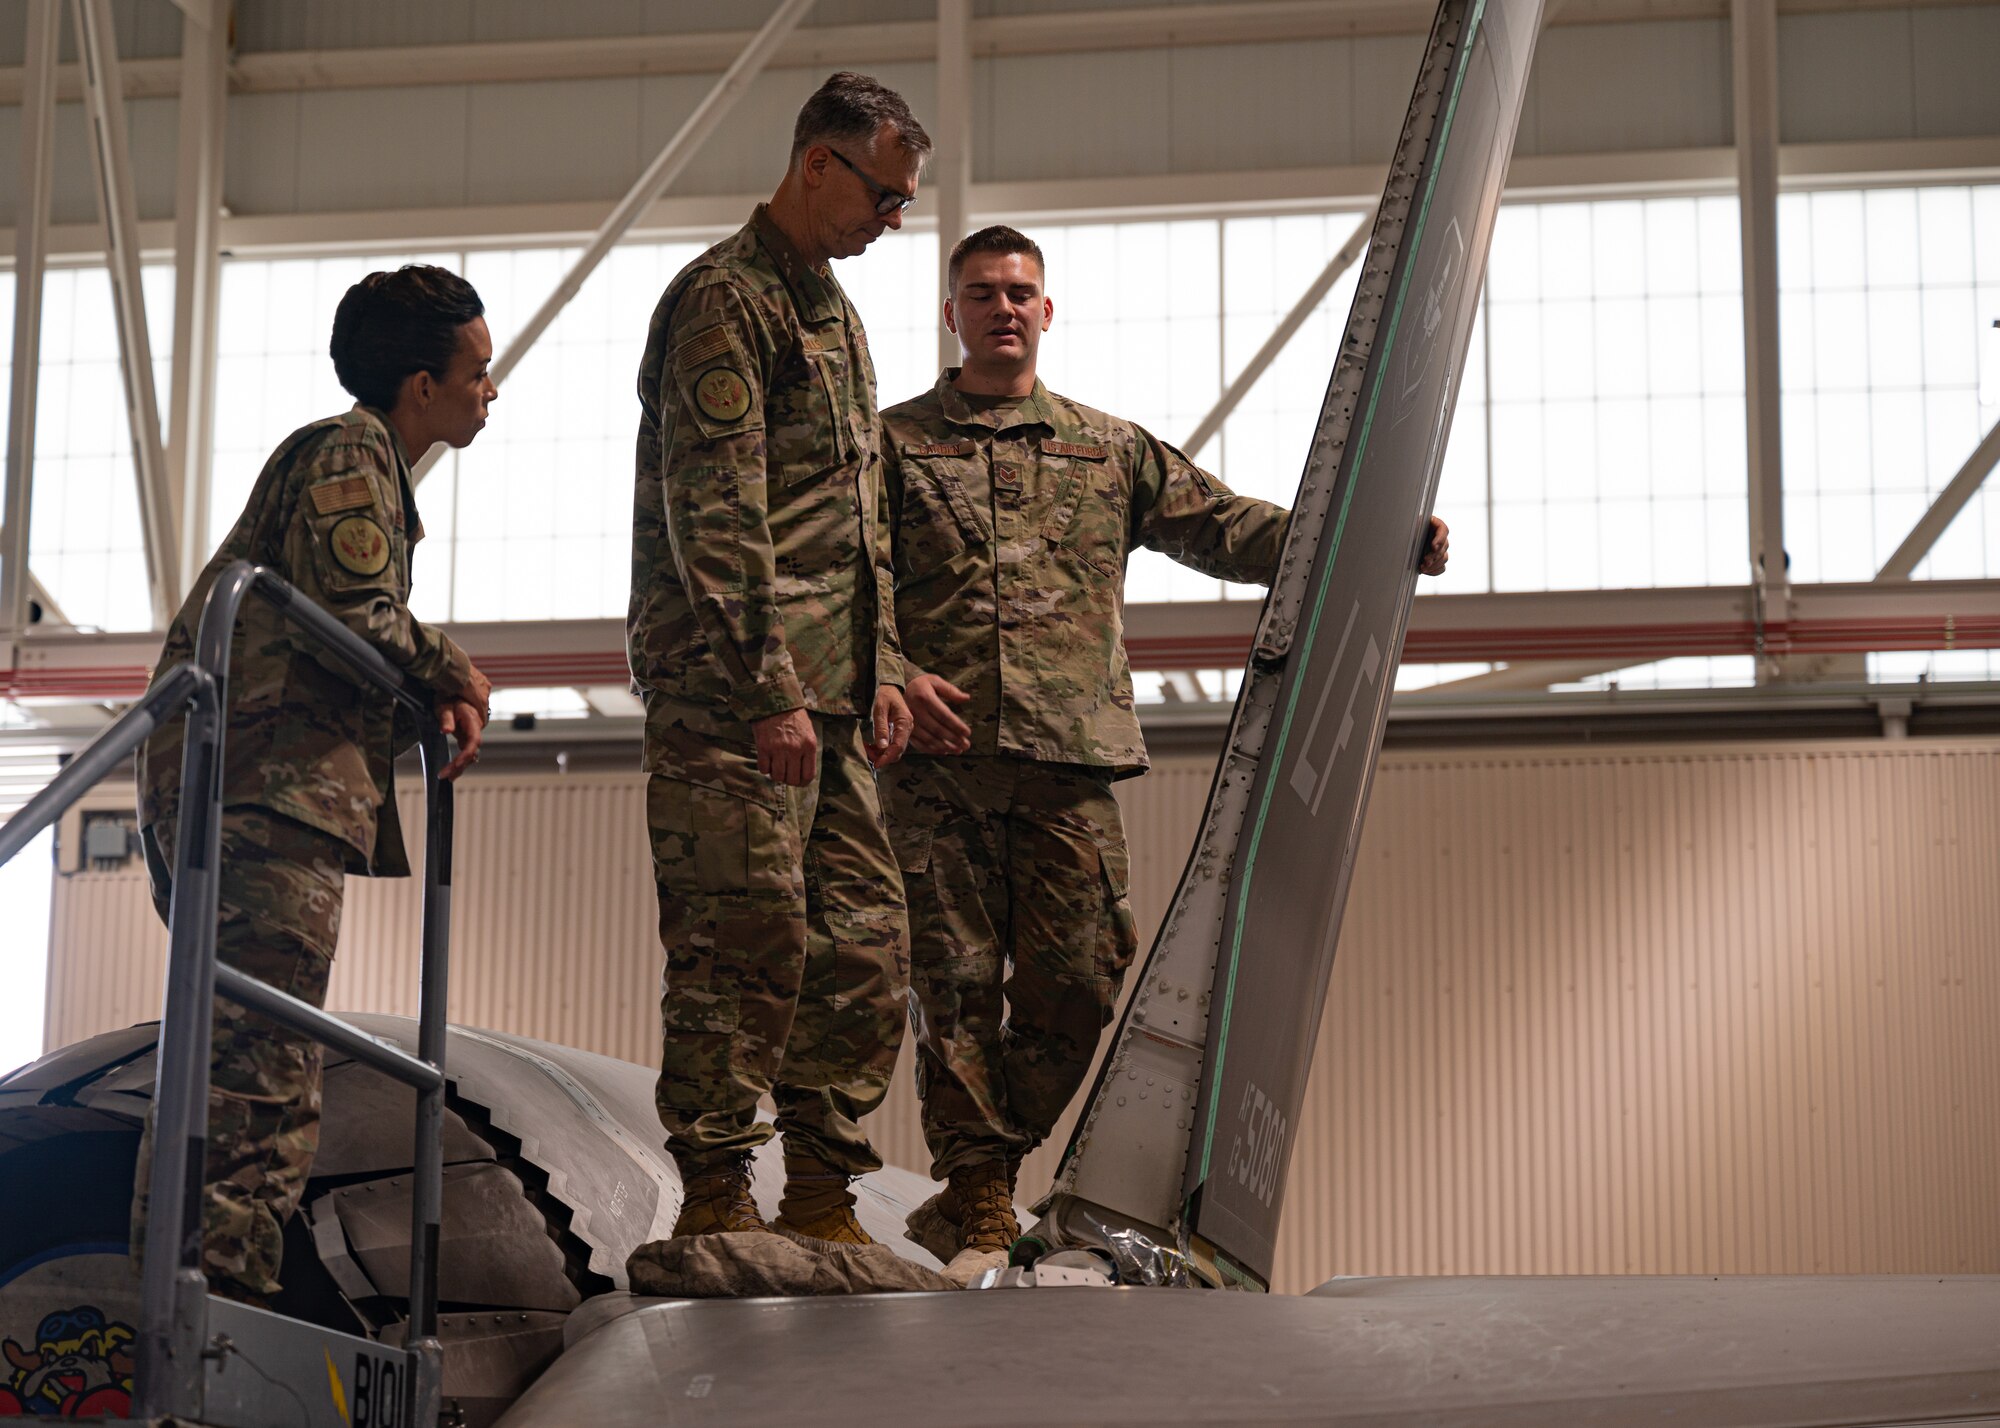 U.S. Air Force Staff Sgt. Tanner Carden, right, 308th Aircraft Maintenance Unit dedicated crew chief, speaks with U.S. Air Force Maj. Gen. Craig Wills, center, 19th Air Force commander, and U.S. Air Force Chief Master Sgt. Kristina Rogers, left, 19th AF command chief, about the components of an F-35 Lightning II, June 29, 2021, at Luke Air Force Base, Arizona. Leadership from the 19th AF visited Luke AFB to engage with 56th Fighter Wing members while gaining a better understanding of the successes and challenges faced by the wing. The 56th FW’s mission is to train the world’s greatest fighter pilots and combat-ready Airmen. (U.S. Air Force photo by Airman 1st Class Dominic Tyler)